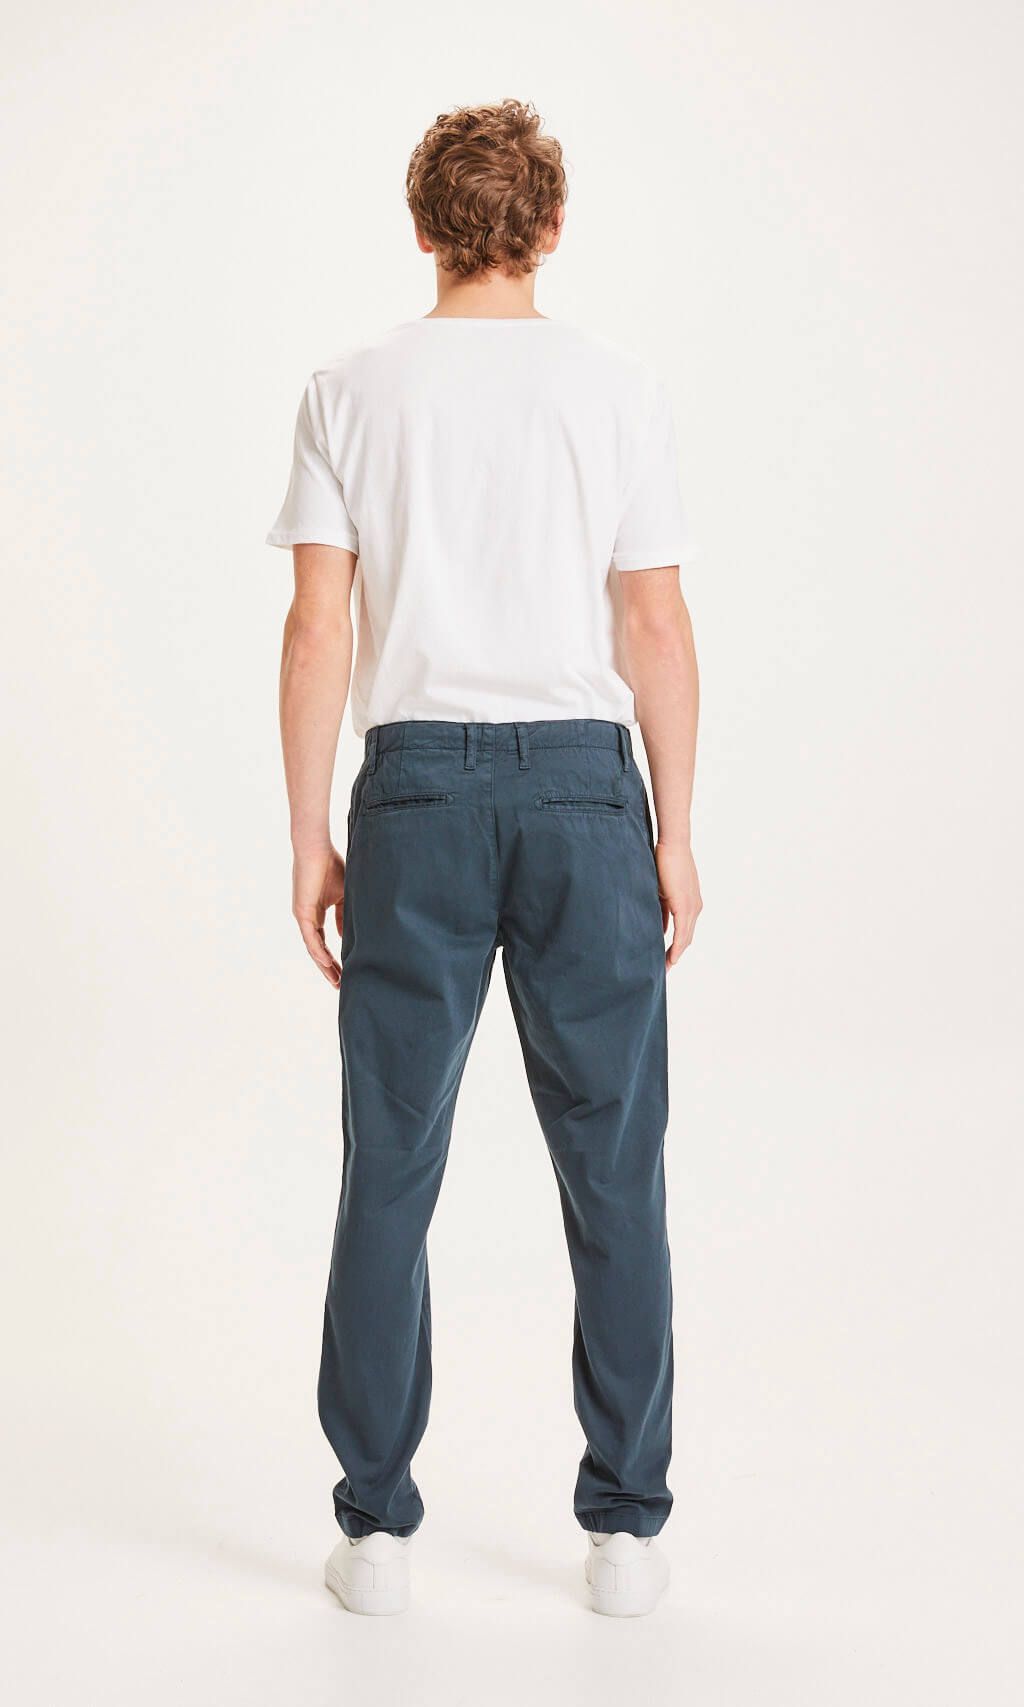 Chuck Regular Stretched Chino Pant Total Eclipse 30/32